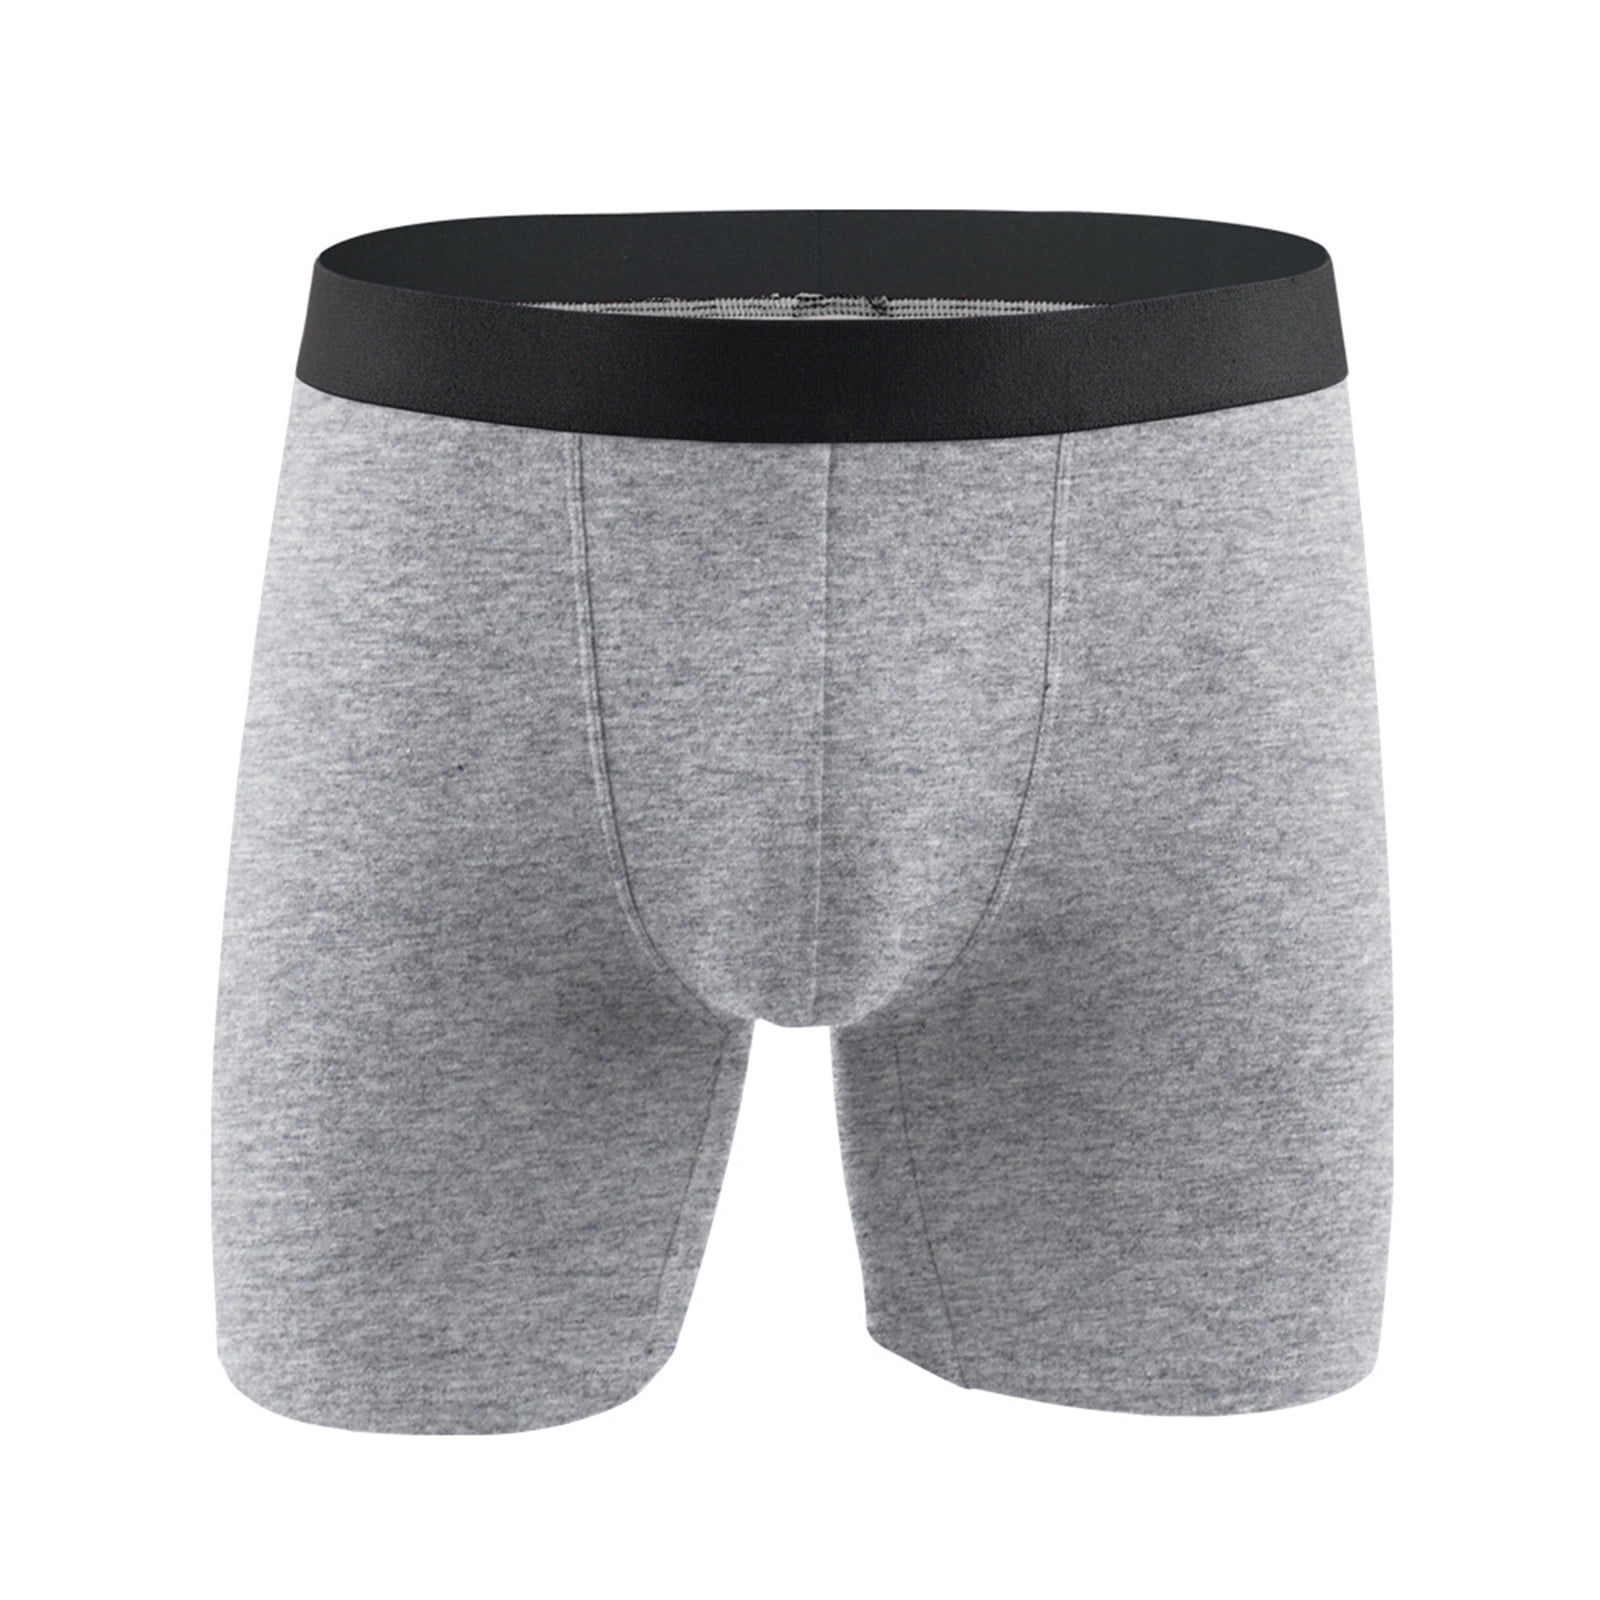 Symoid Mens Boxer Briefs- Clearance Panties in Store Solid Cotton Plus ...